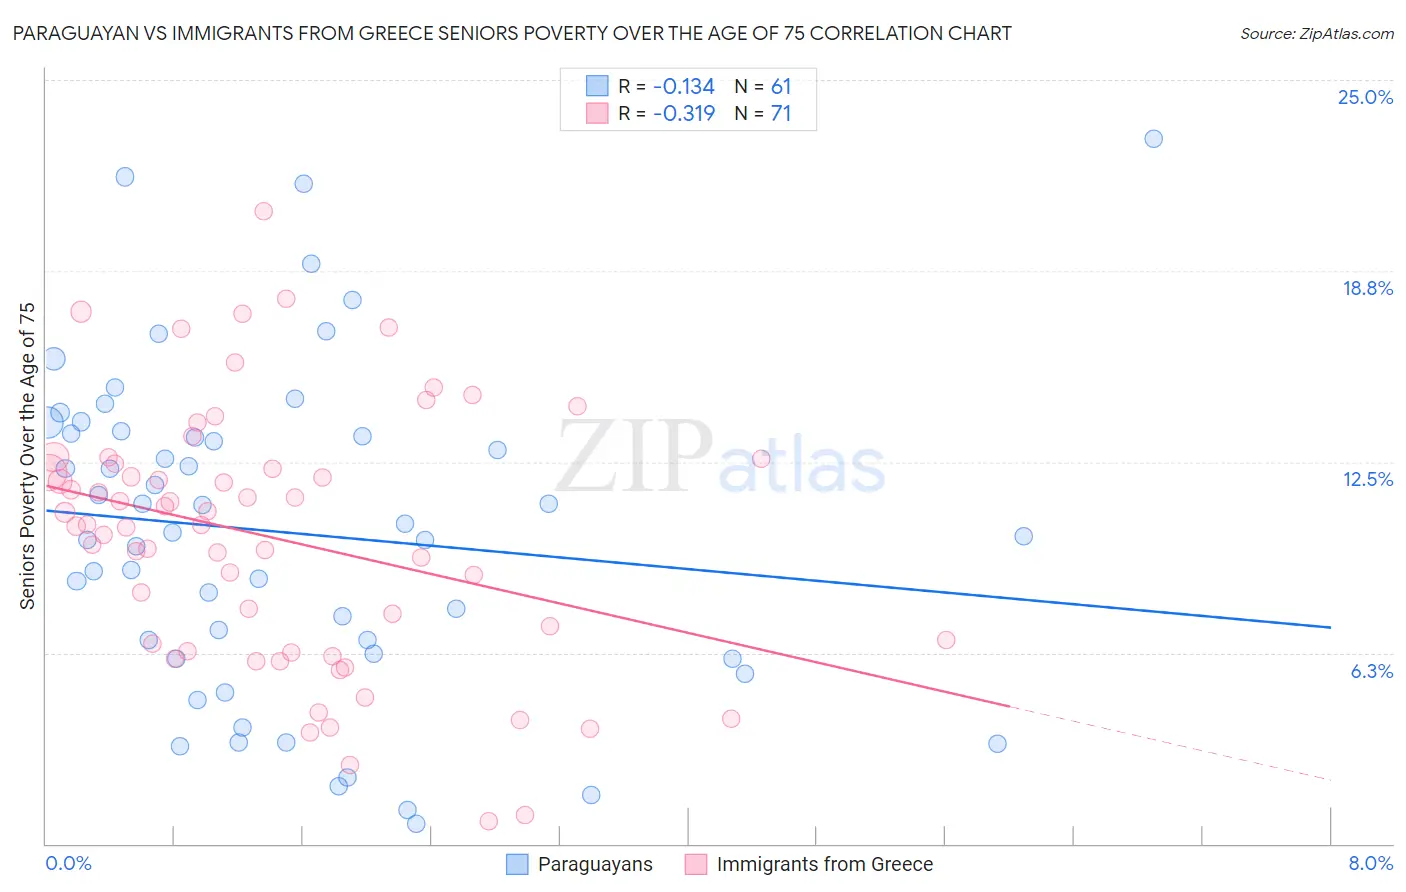 Paraguayan vs Immigrants from Greece Seniors Poverty Over the Age of 75